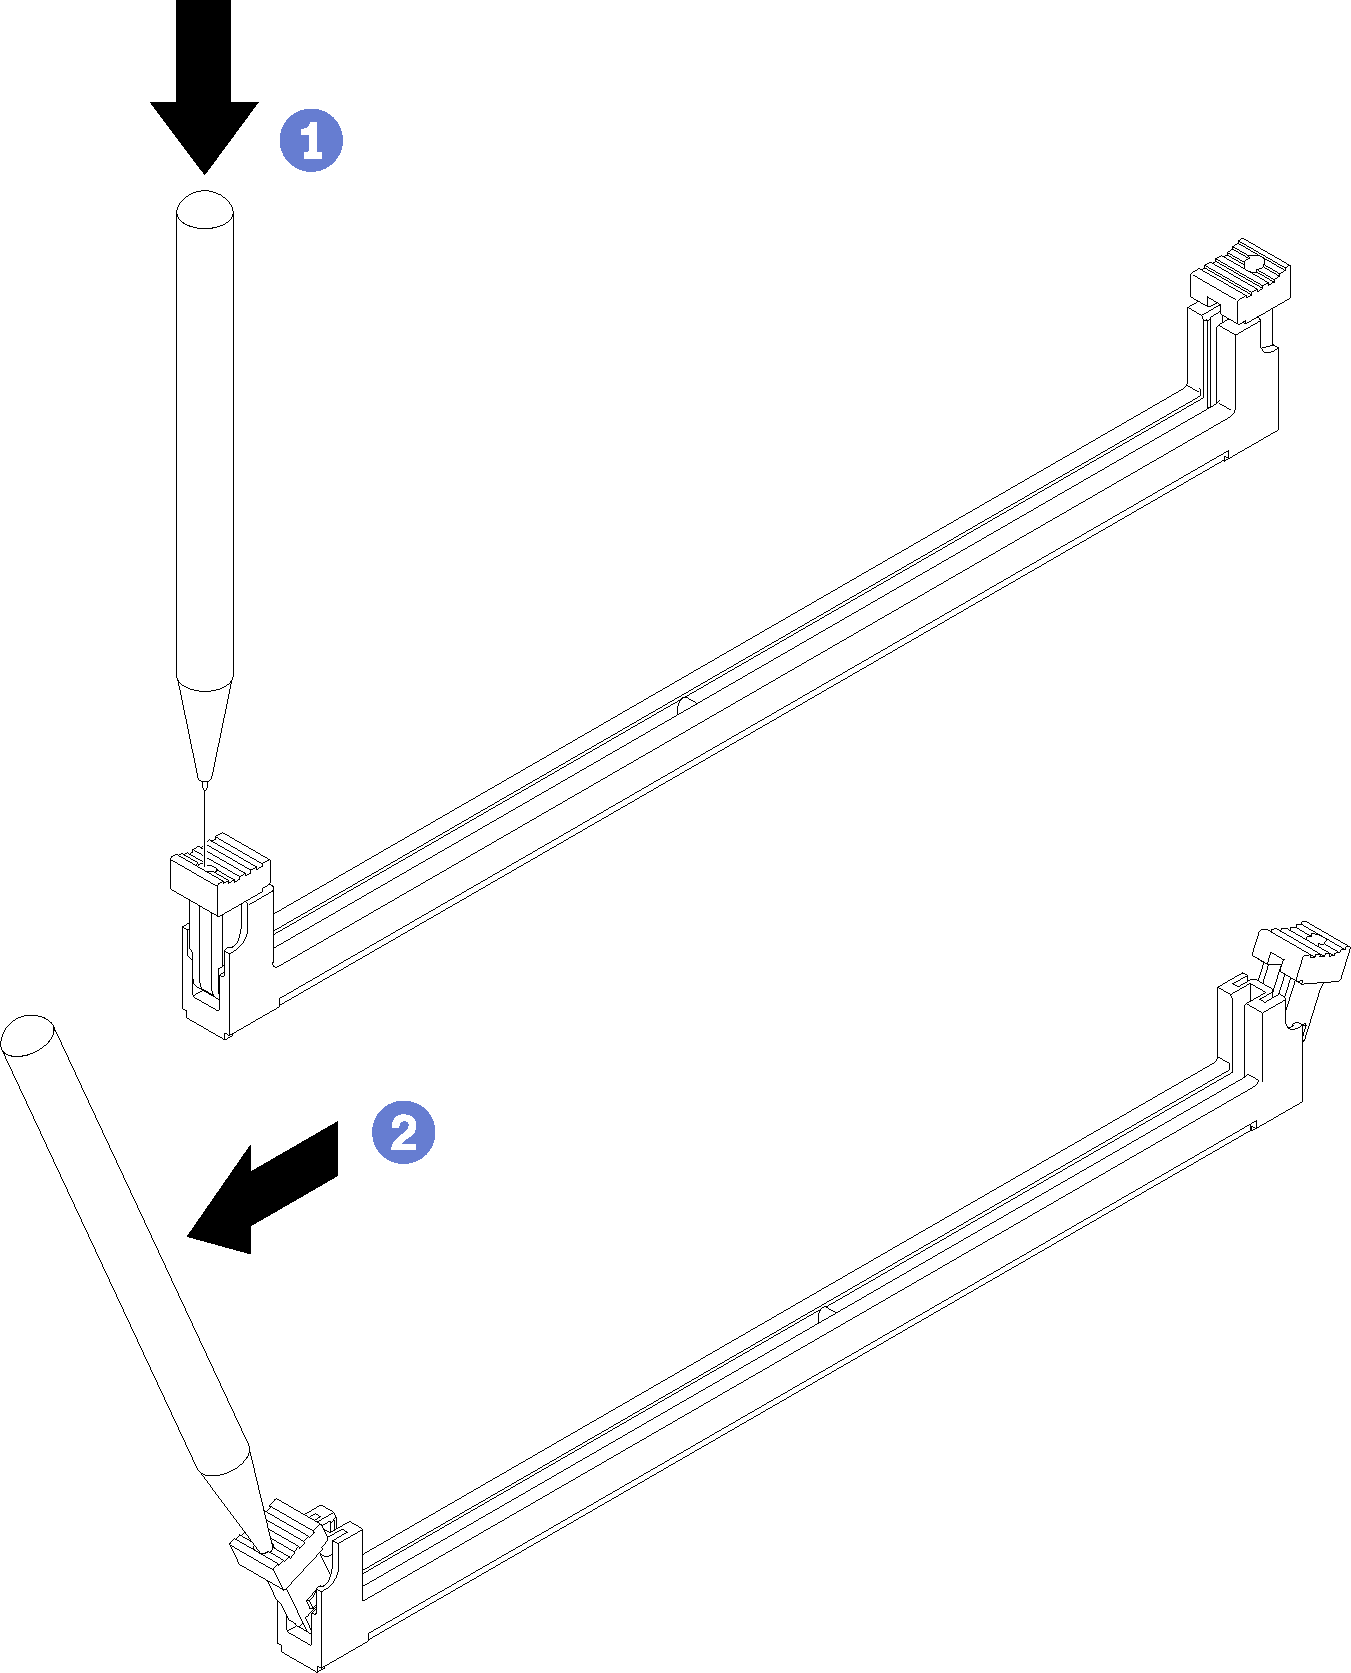 Graphic illustrating opening the DIMM latch